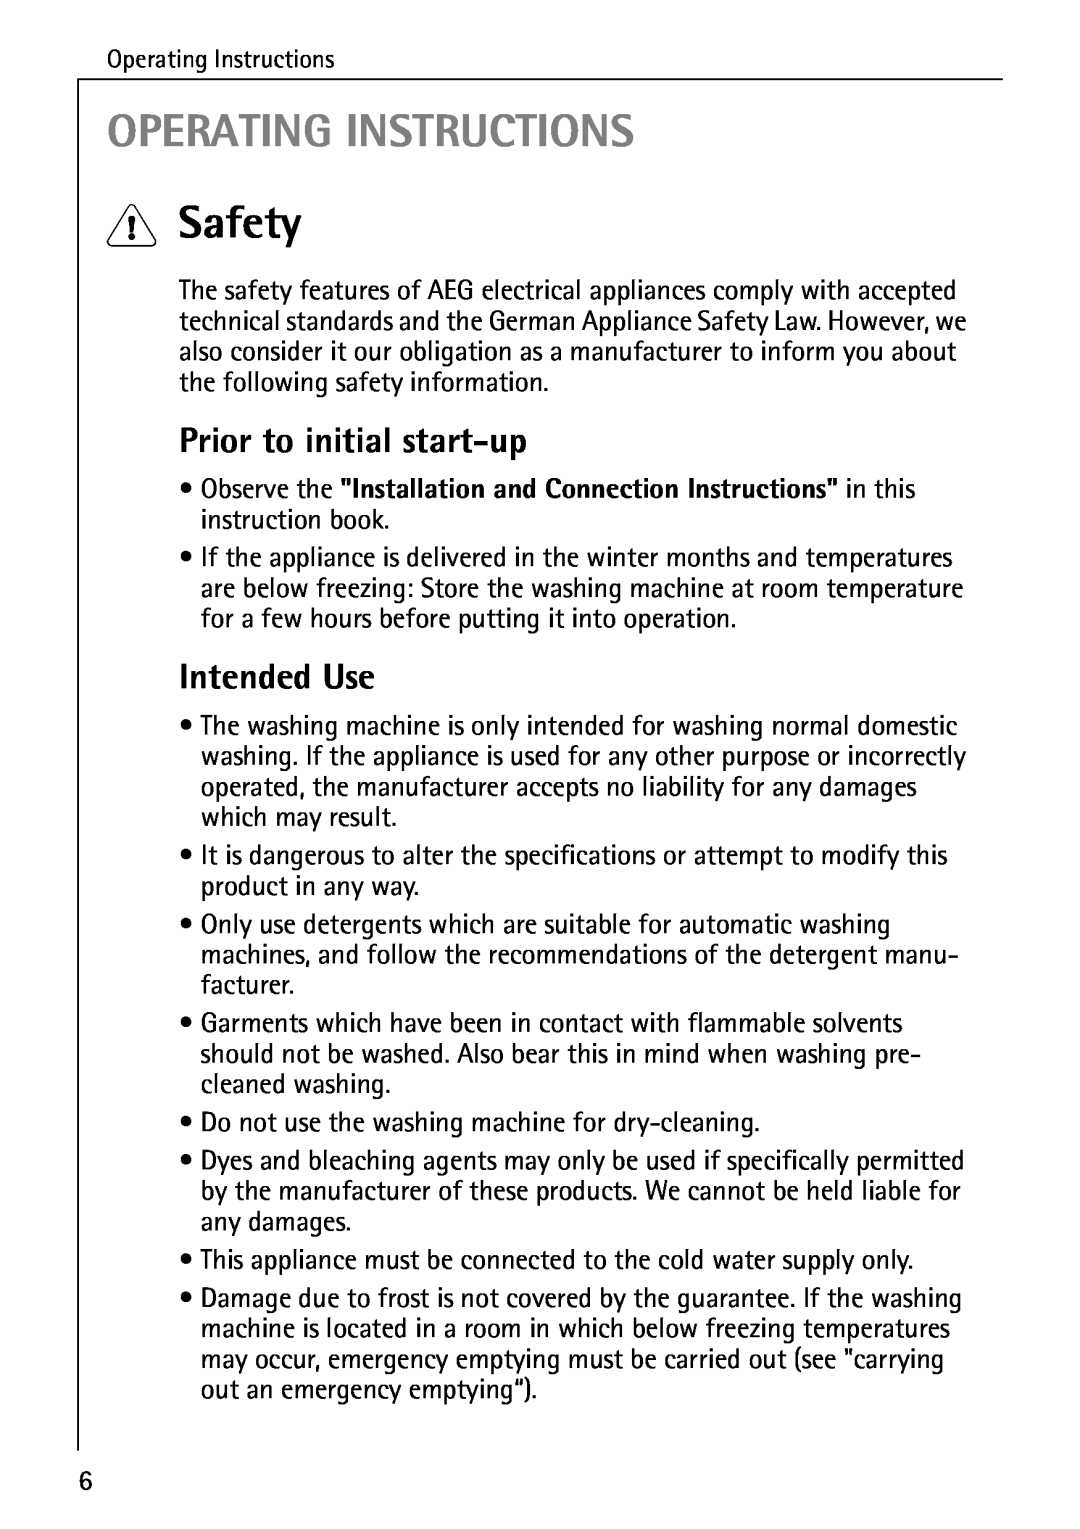 Electrolux 76639 manual Operating Instructions, Safety, Prior to initial start-up, Intended Use 